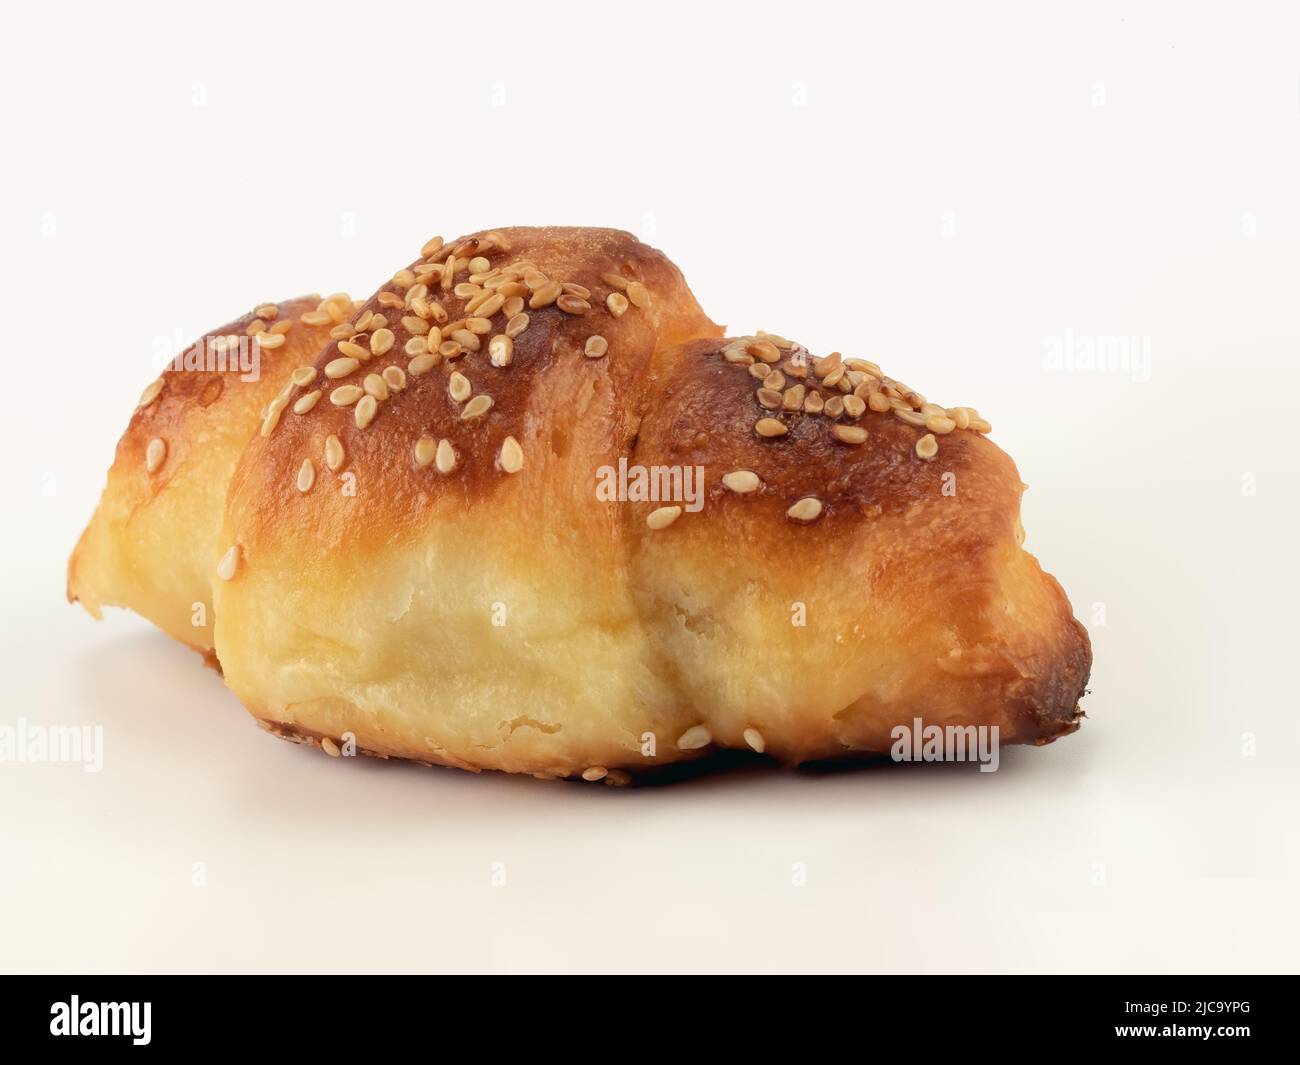 Homemade baked roll with sesame seeds. Close up view. Stock Photo